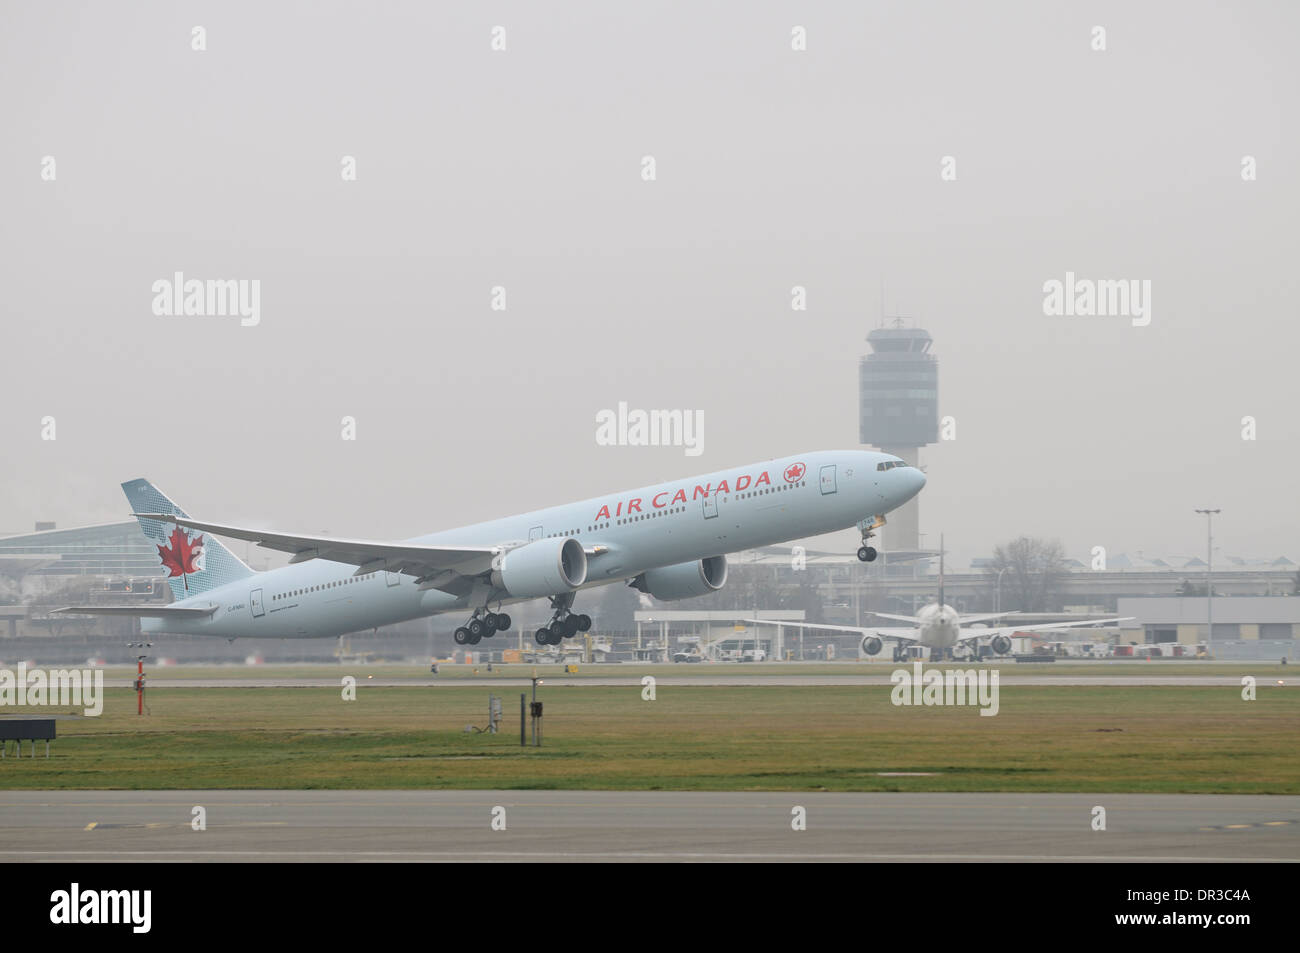 Air Canada Boeing 777-300ER C-FNNU taking off in foggy weather conditions from Vancouver International Airport Canada Stock Photo